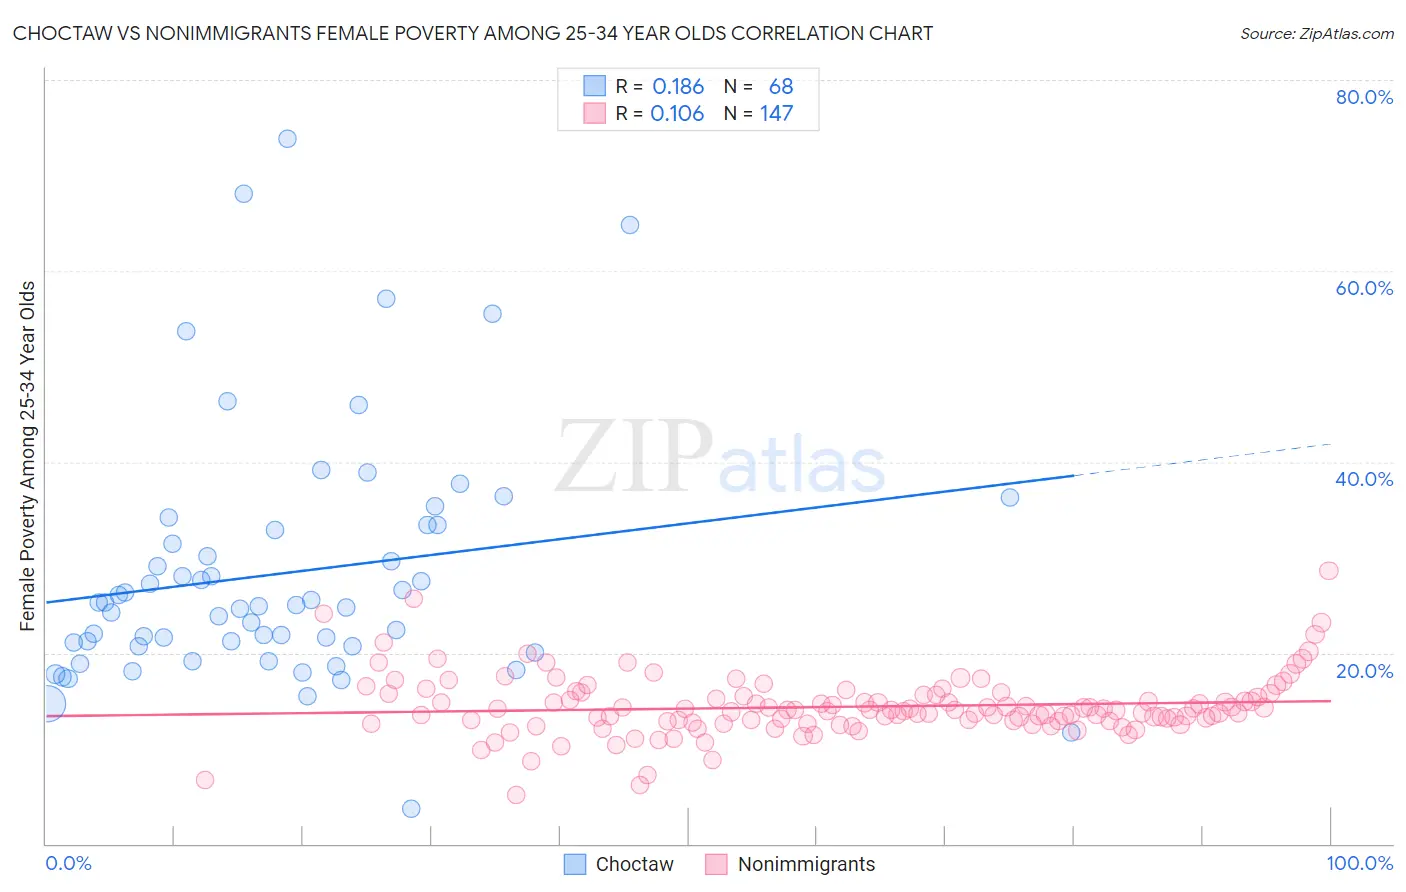 Choctaw vs Nonimmigrants Female Poverty Among 25-34 Year Olds